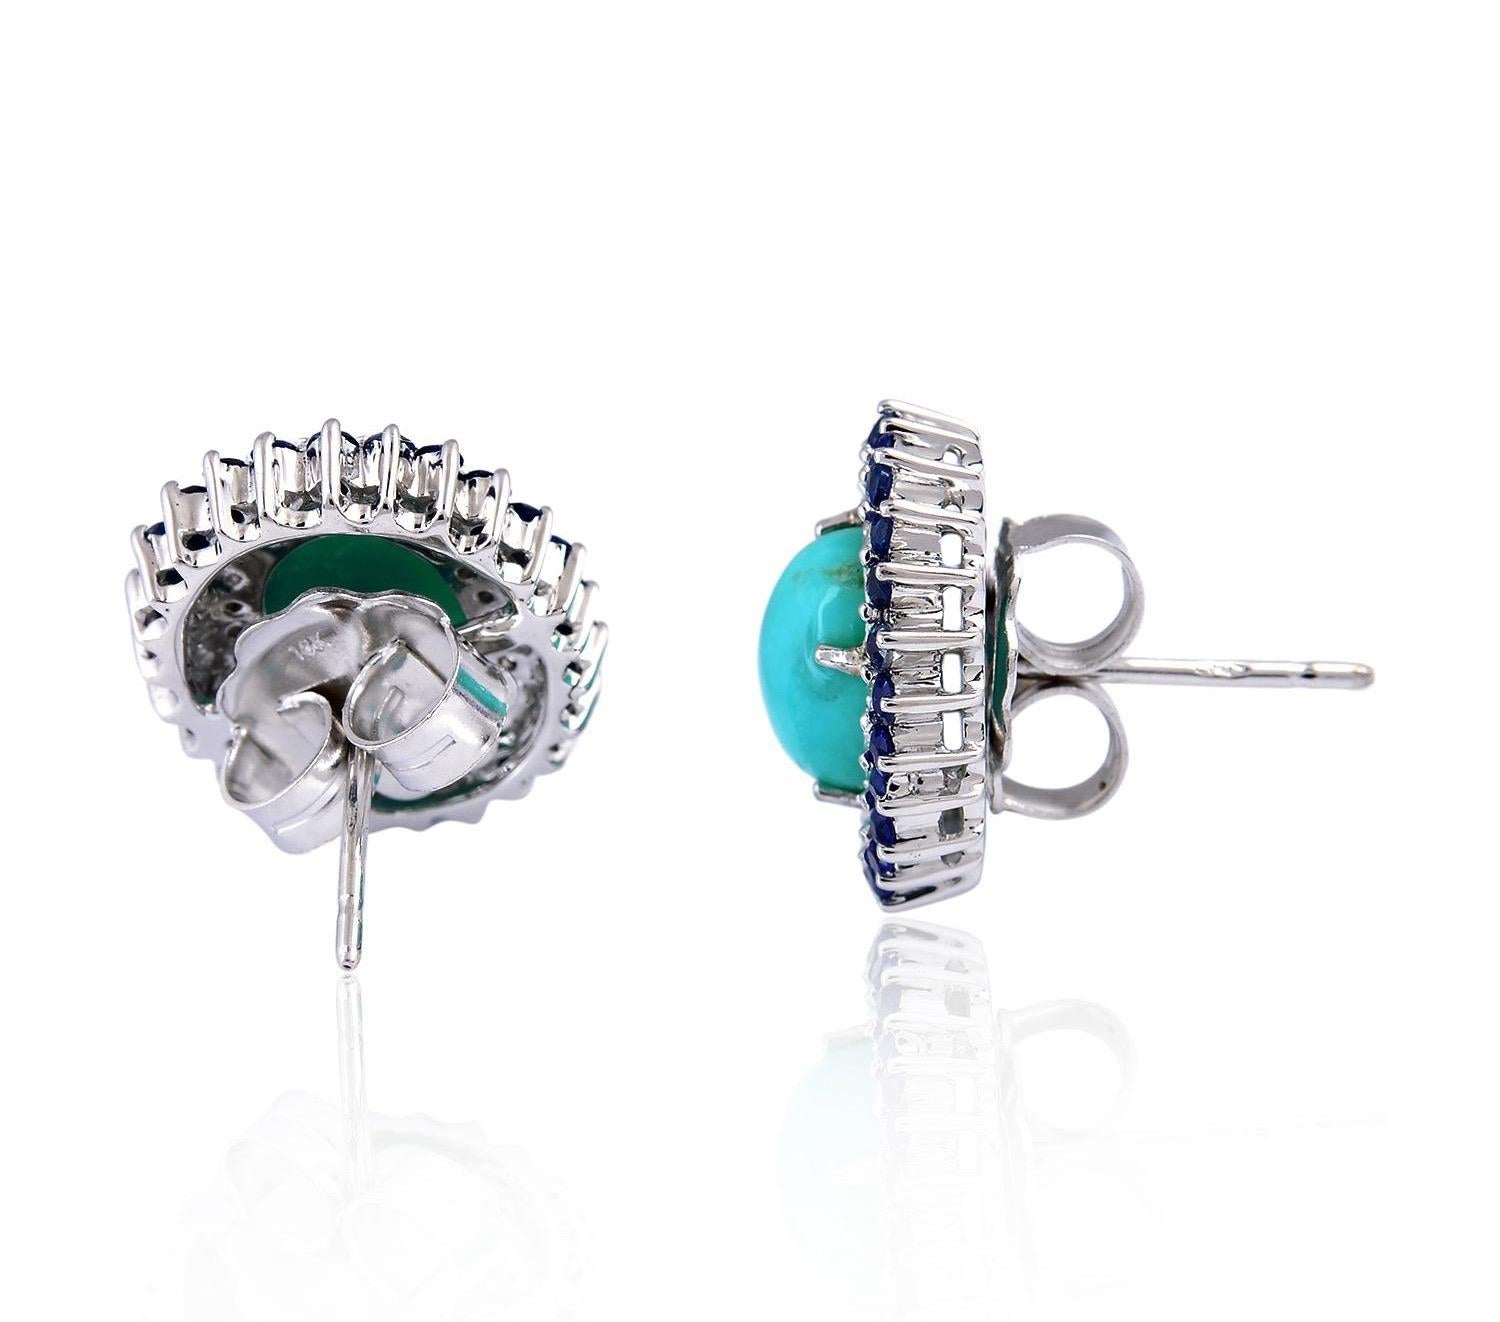 Cast from 18-karat gold and sterling silver, these studs earrings are hand set with 4.2 carats turquoise, .96 carats sapphire and .23 carats of shimmering diamonds.

FOLLOW MEGHNA JEWELS storefront to view the latest collection & exclusive pieces.